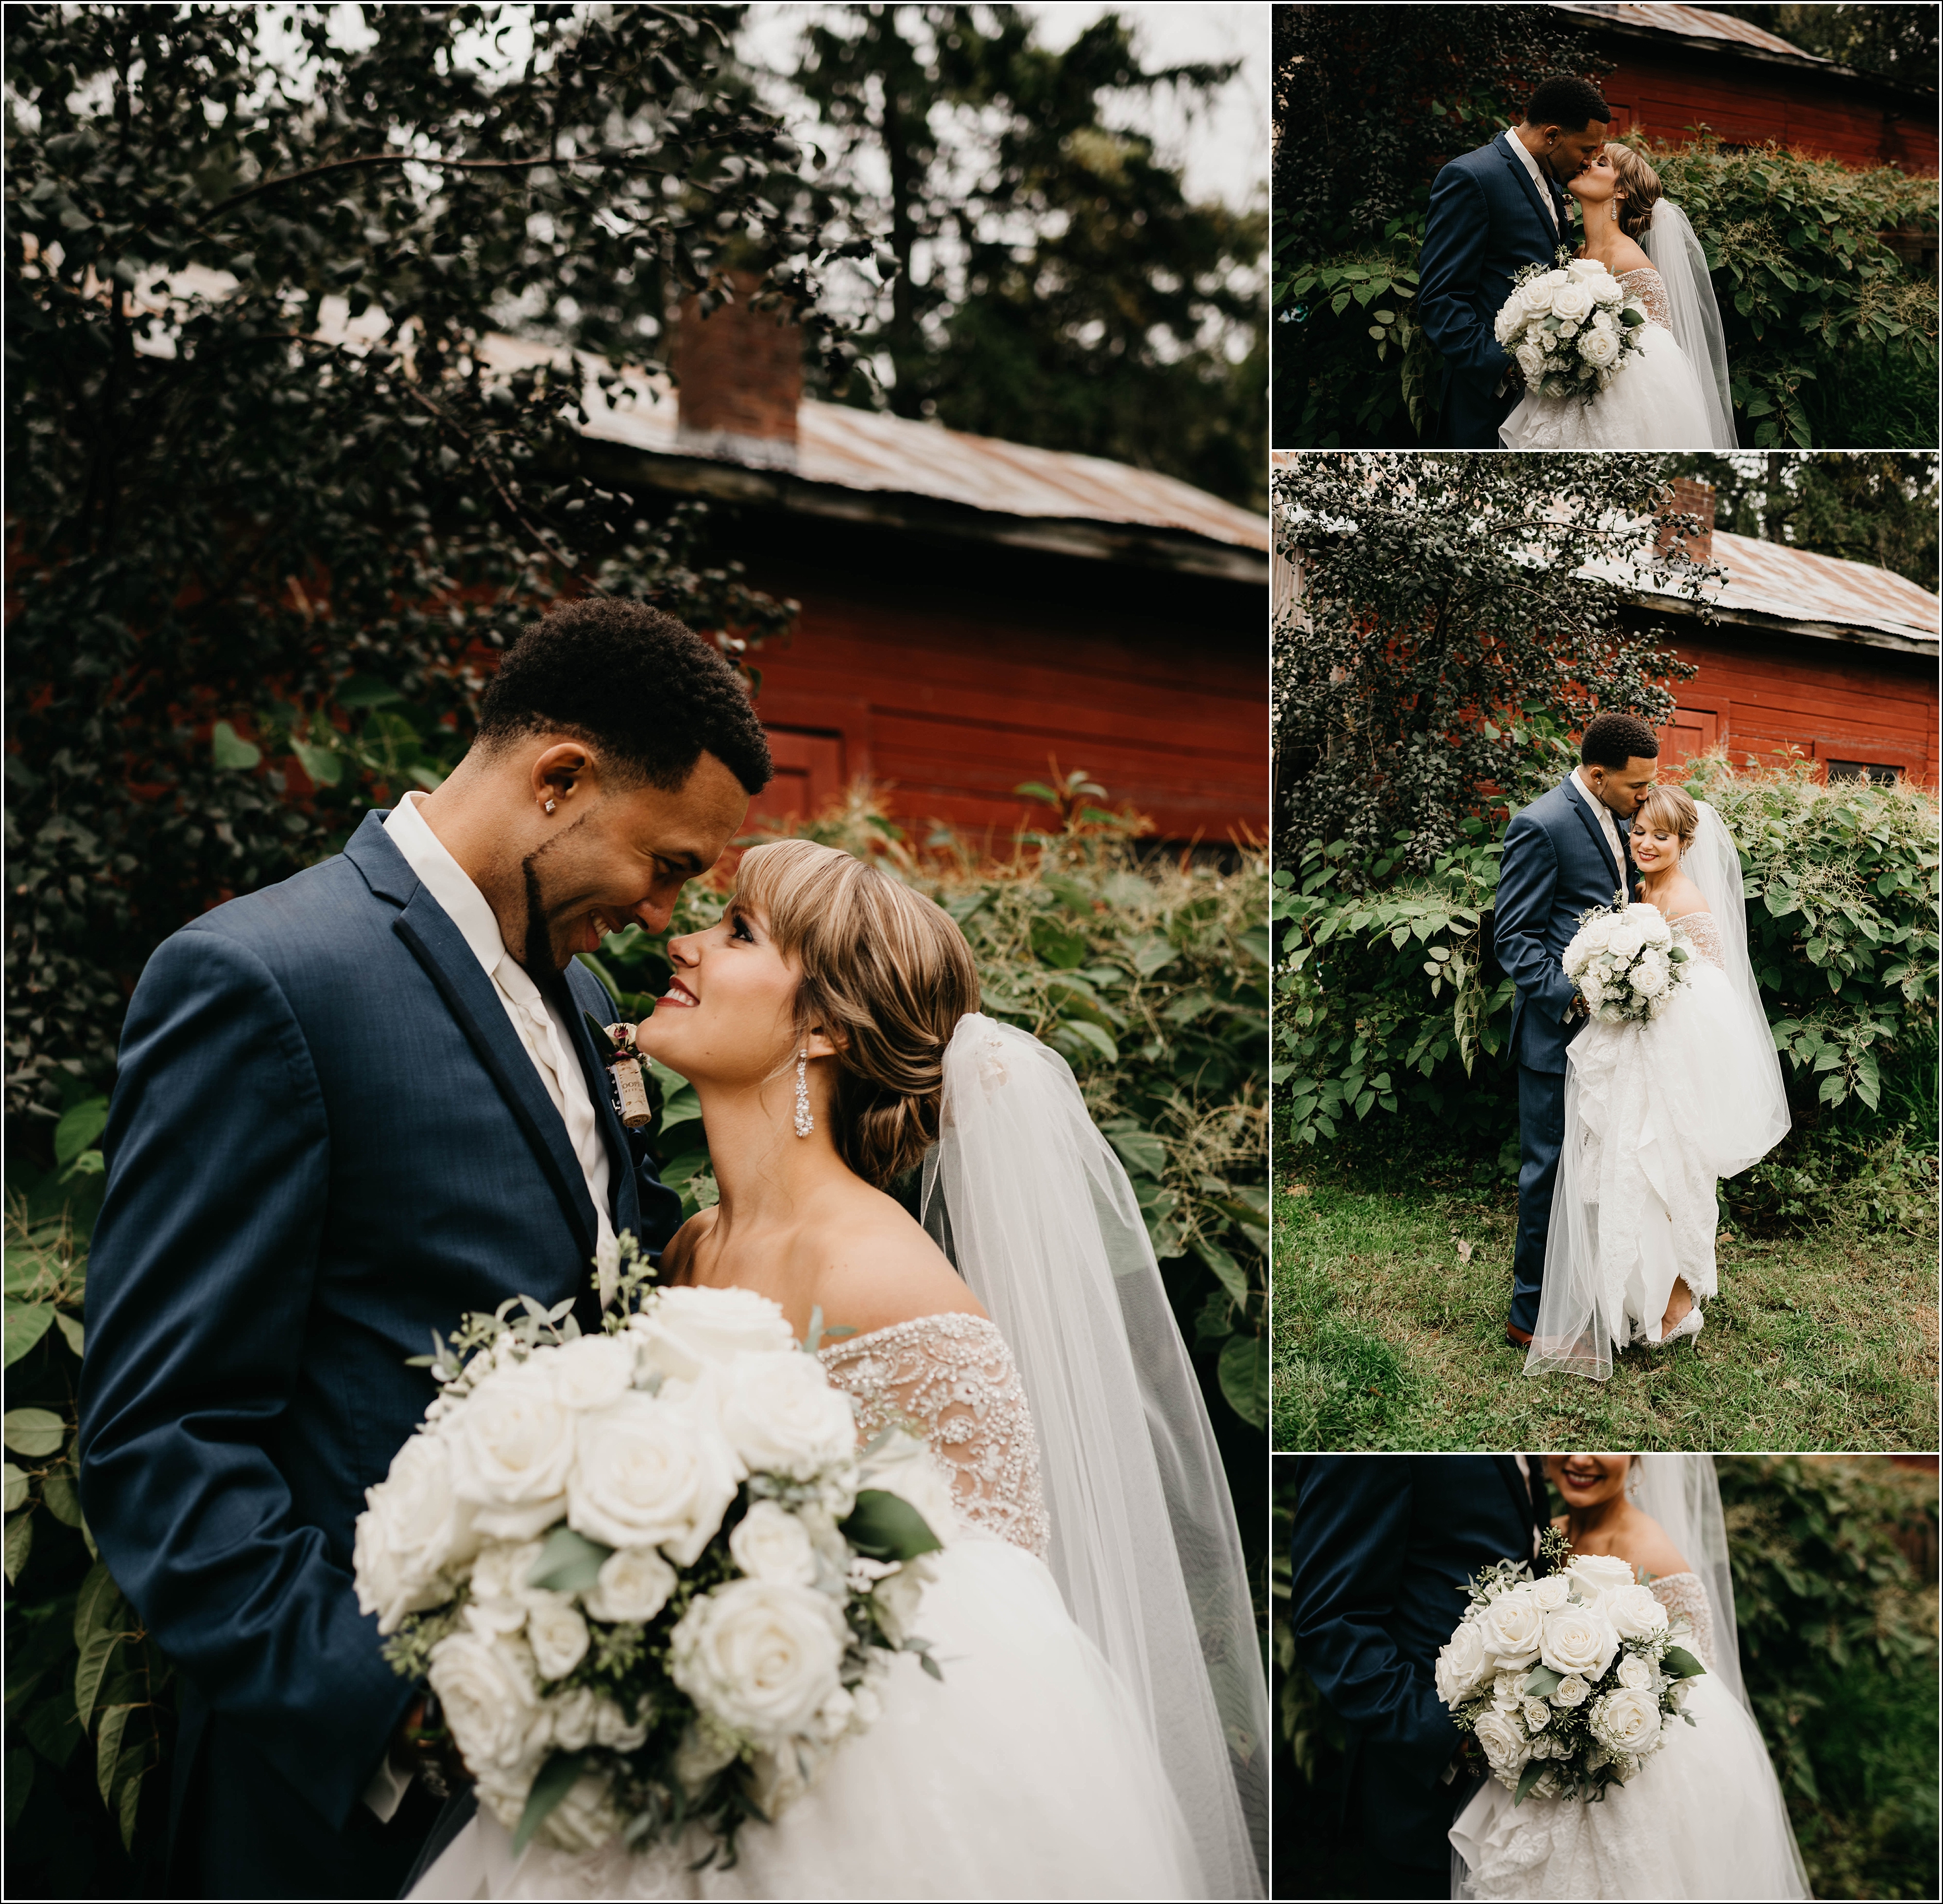 romantic fall wedding bride and groom in front of red barn bouquet and dress kissing